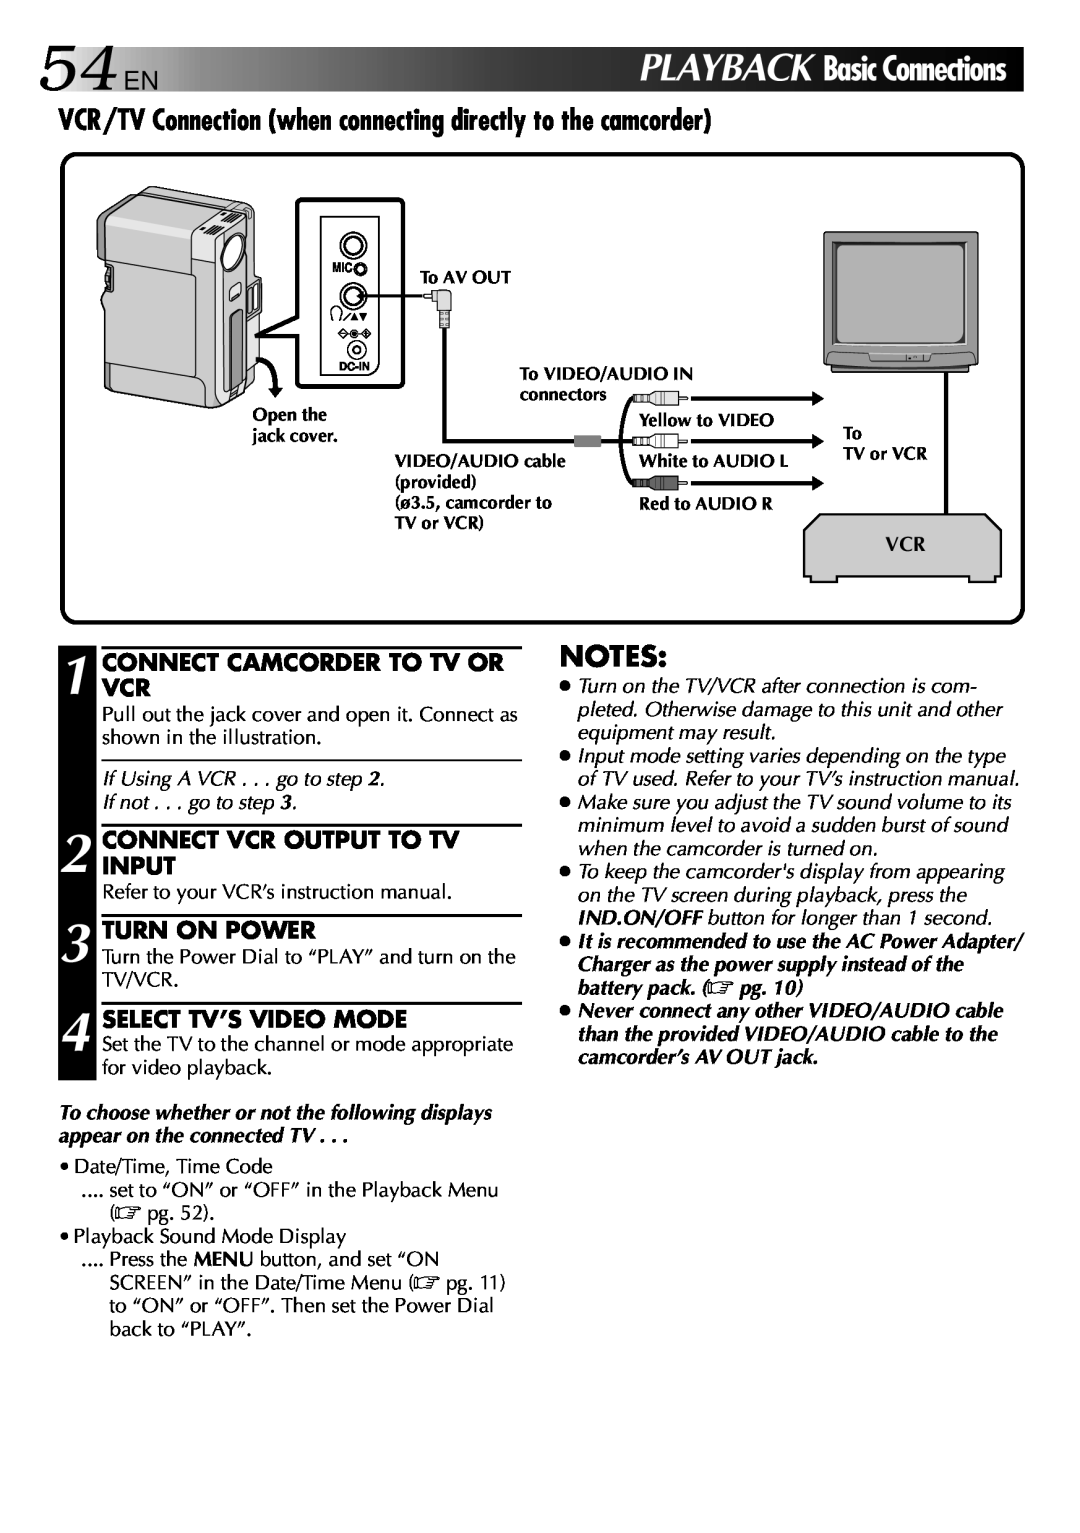 JVC LYT0002-0Y6A manual PLAYBACK Basic Connections, VCR/TV Connection when connecting directly to the camcorder, 54EN 